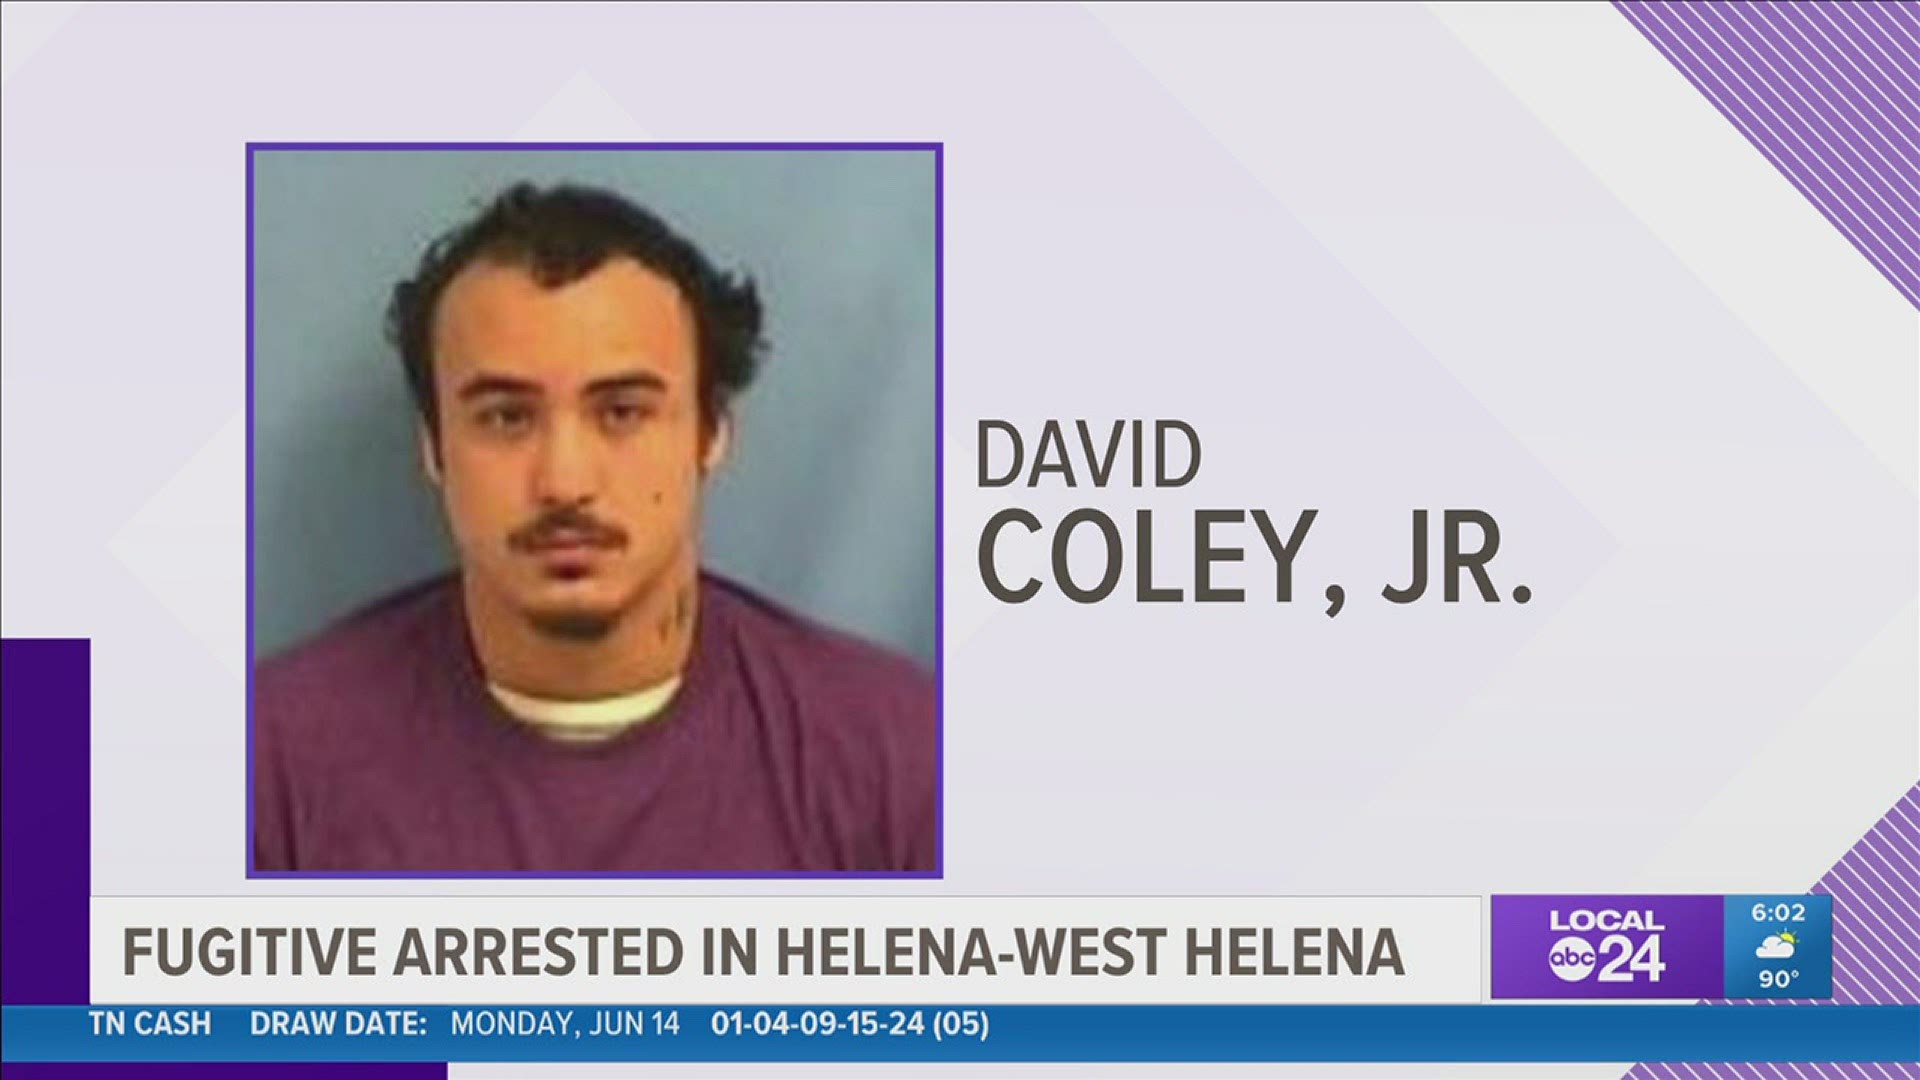 David Coley, Jr. of Helena-West Helena, was arrested without incident about 10:45 p.m. June 15th.